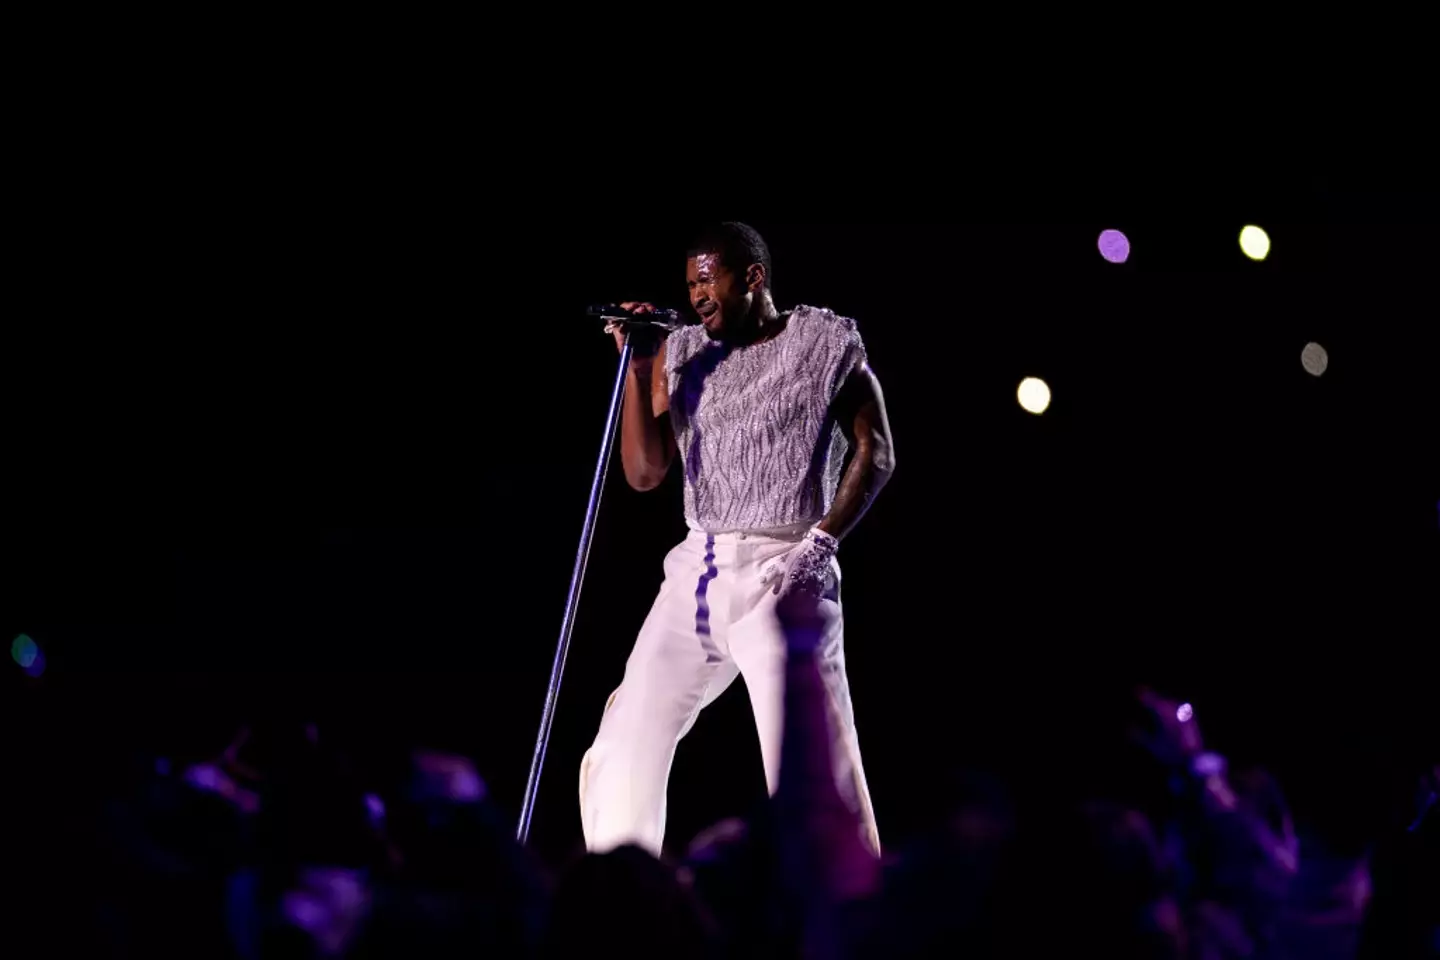 Usher performed at this year's Super Bowl.